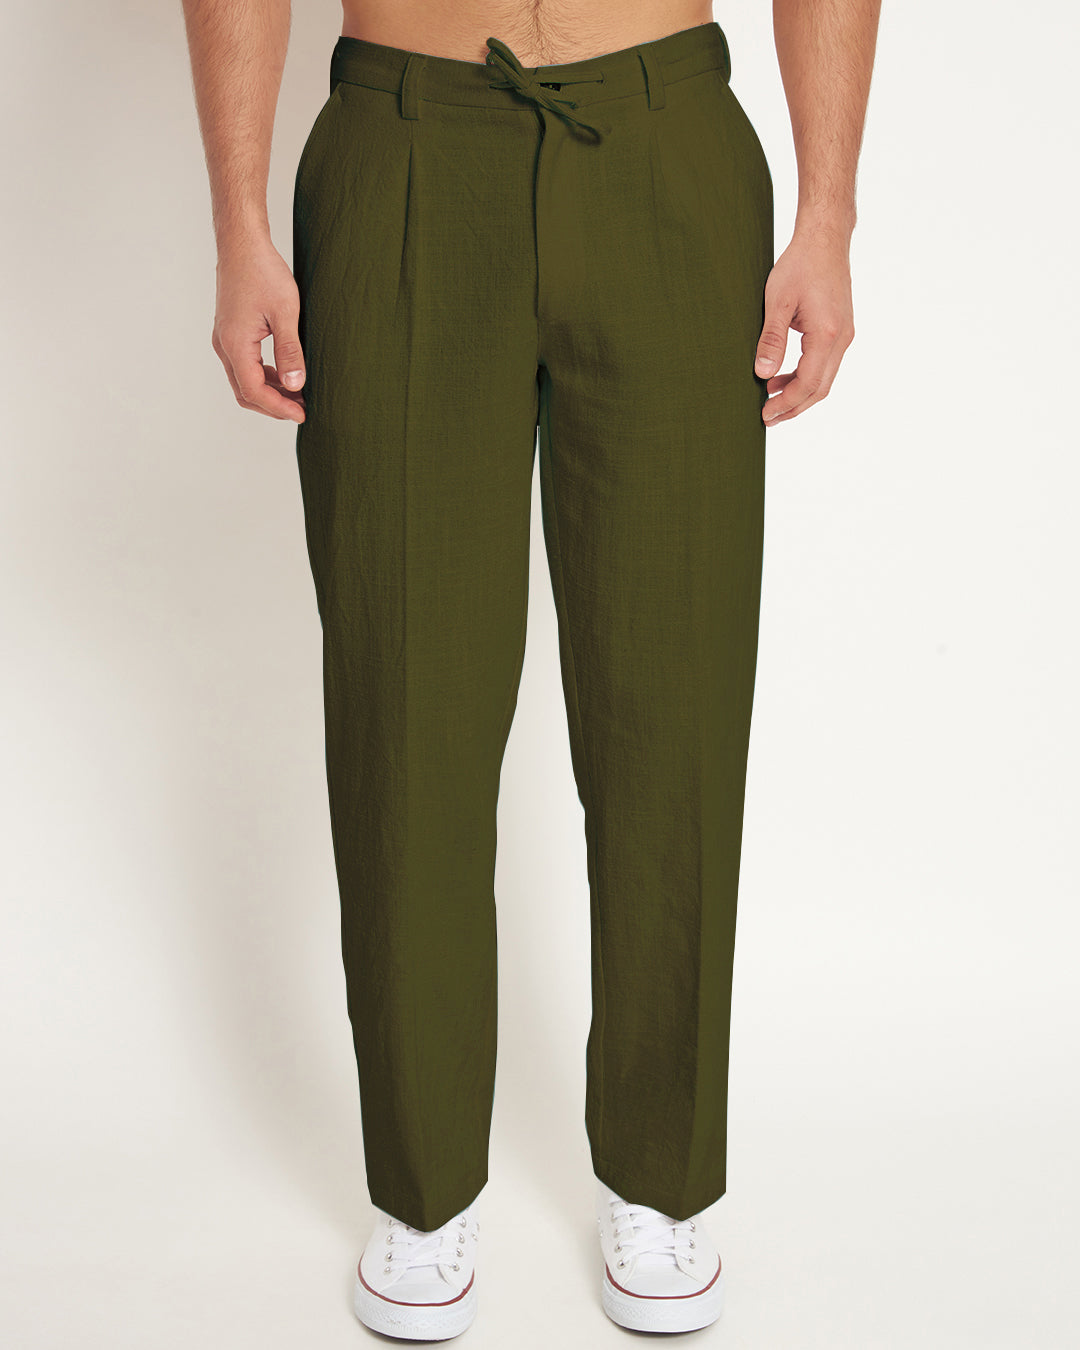 Combo: Casual Ease Olive Green & White Men's Pants - Set of 2